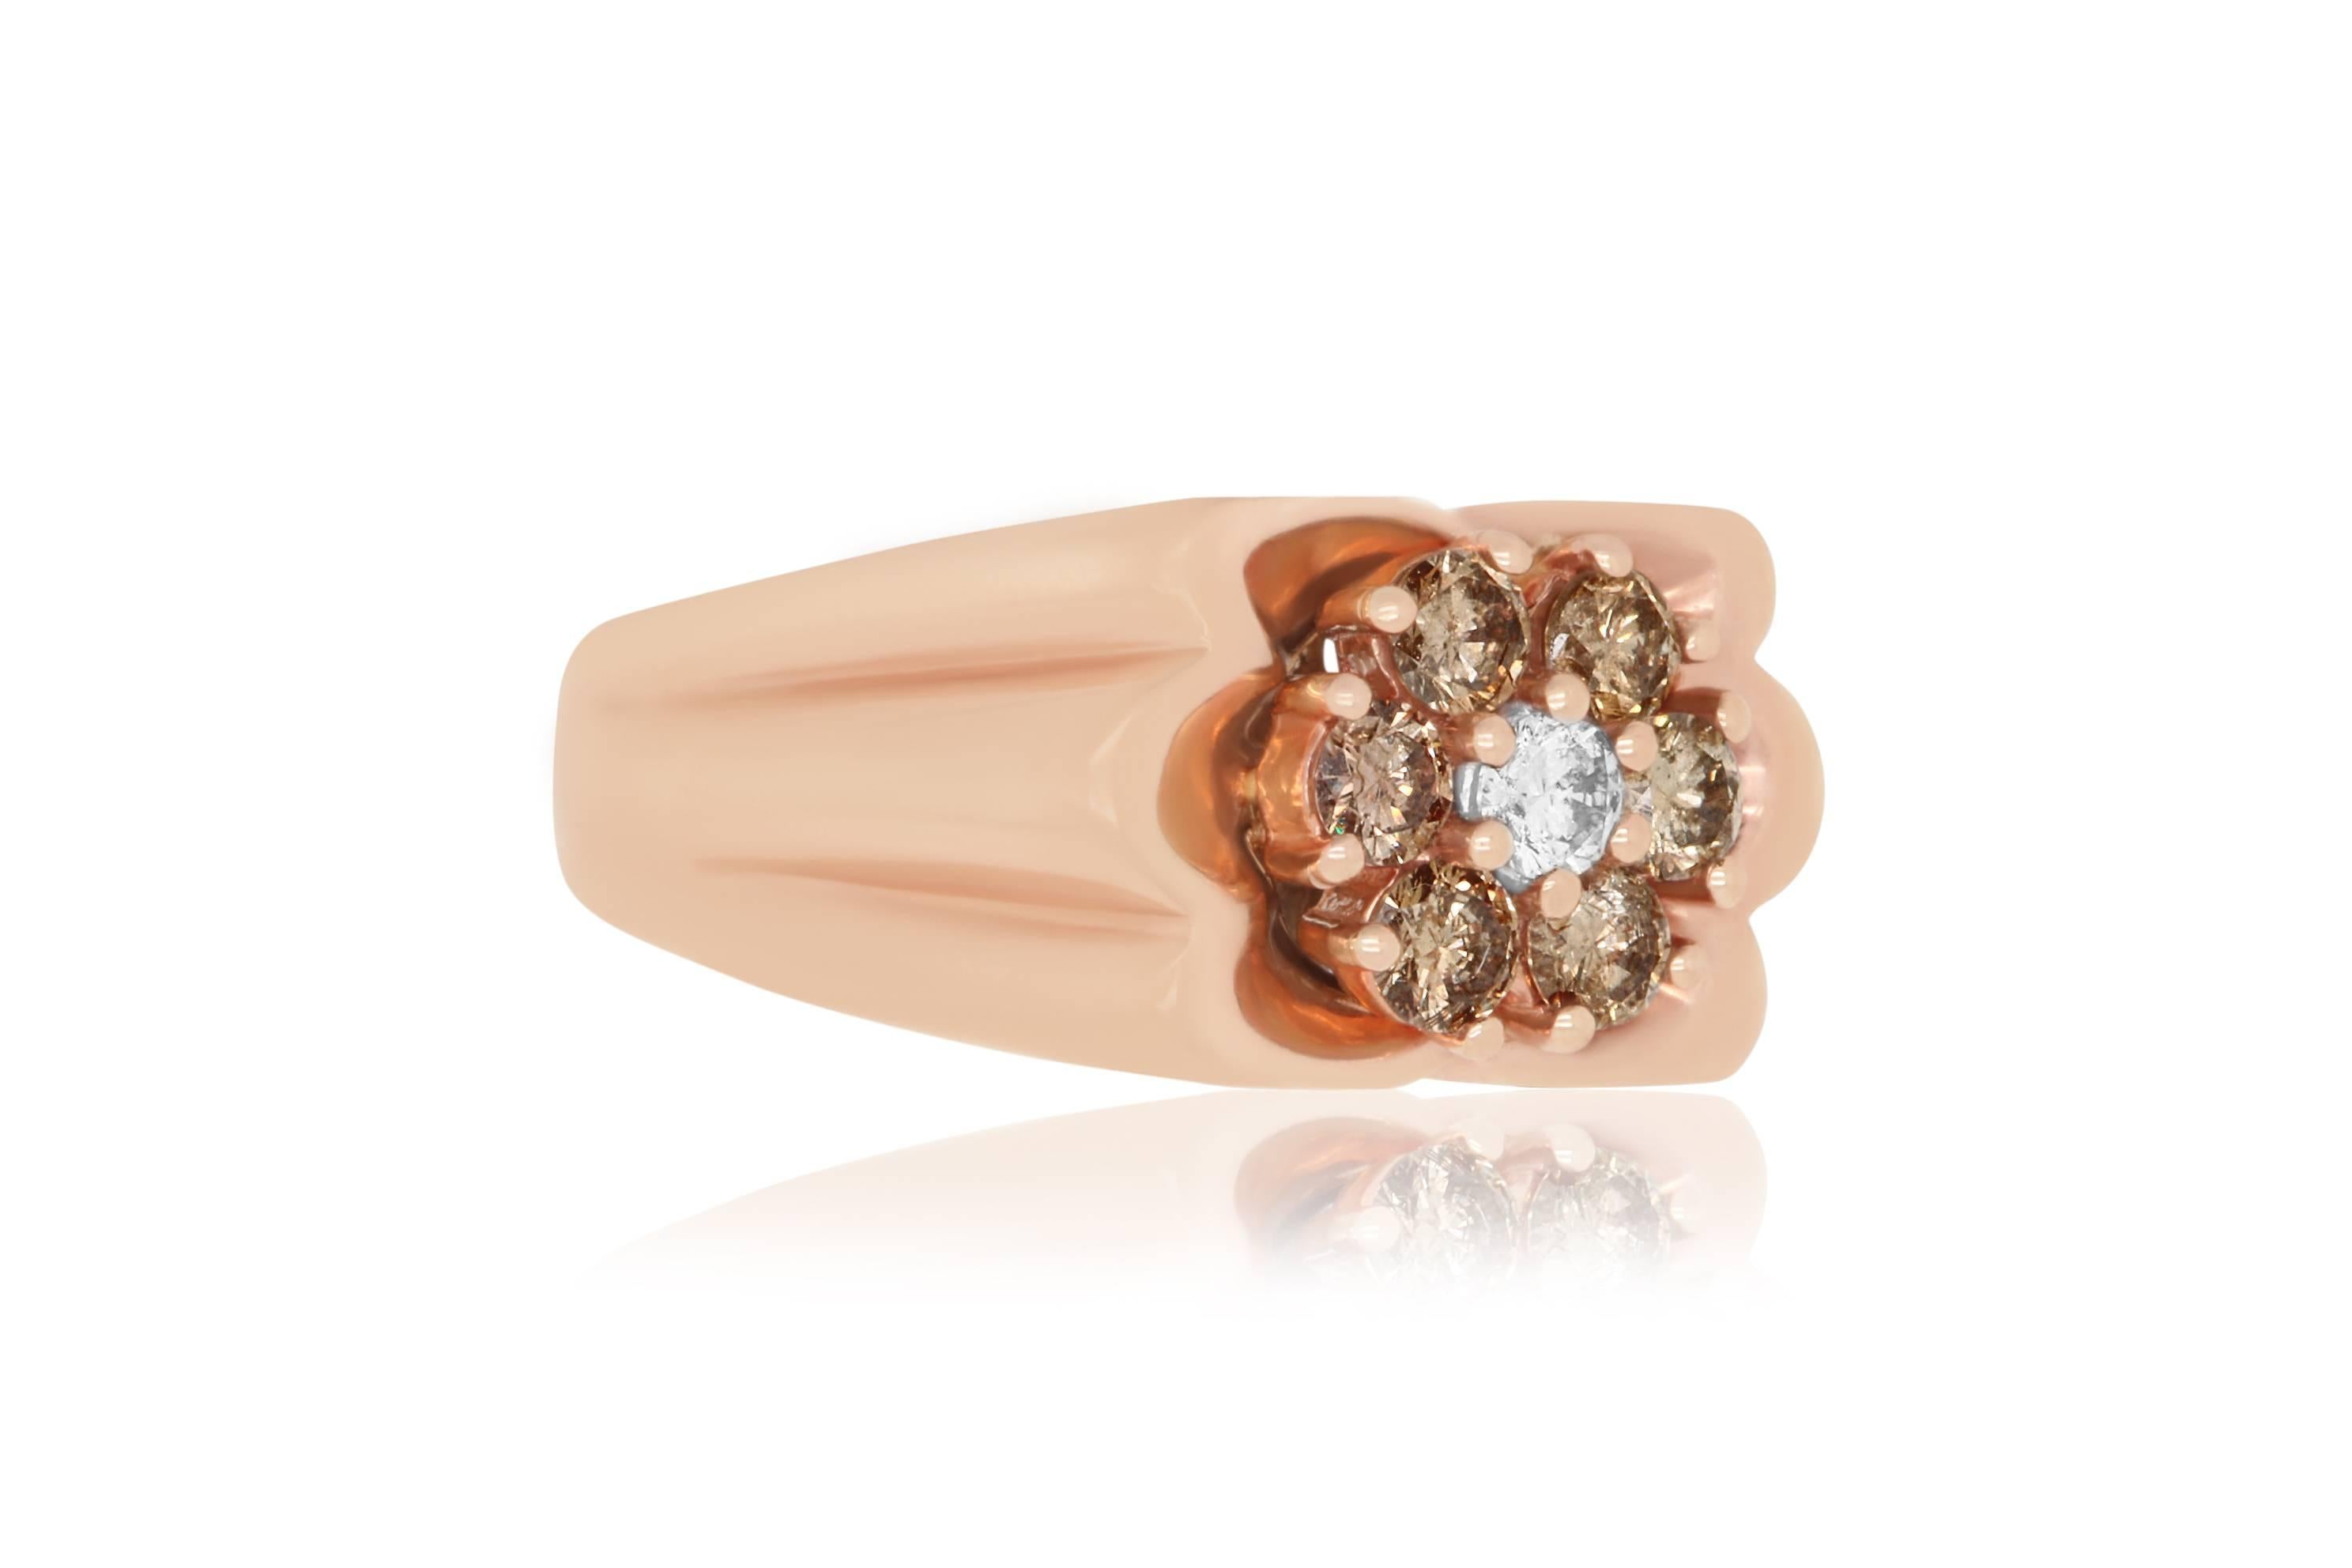 This one of a kind Cognac diamond flower ring isn't a traditional mens style.  Rather than a large center stone, this ring features 6 round Cognac diamonds encircling a single round White Diamond to complete this dainty flower look.

Material: 14k